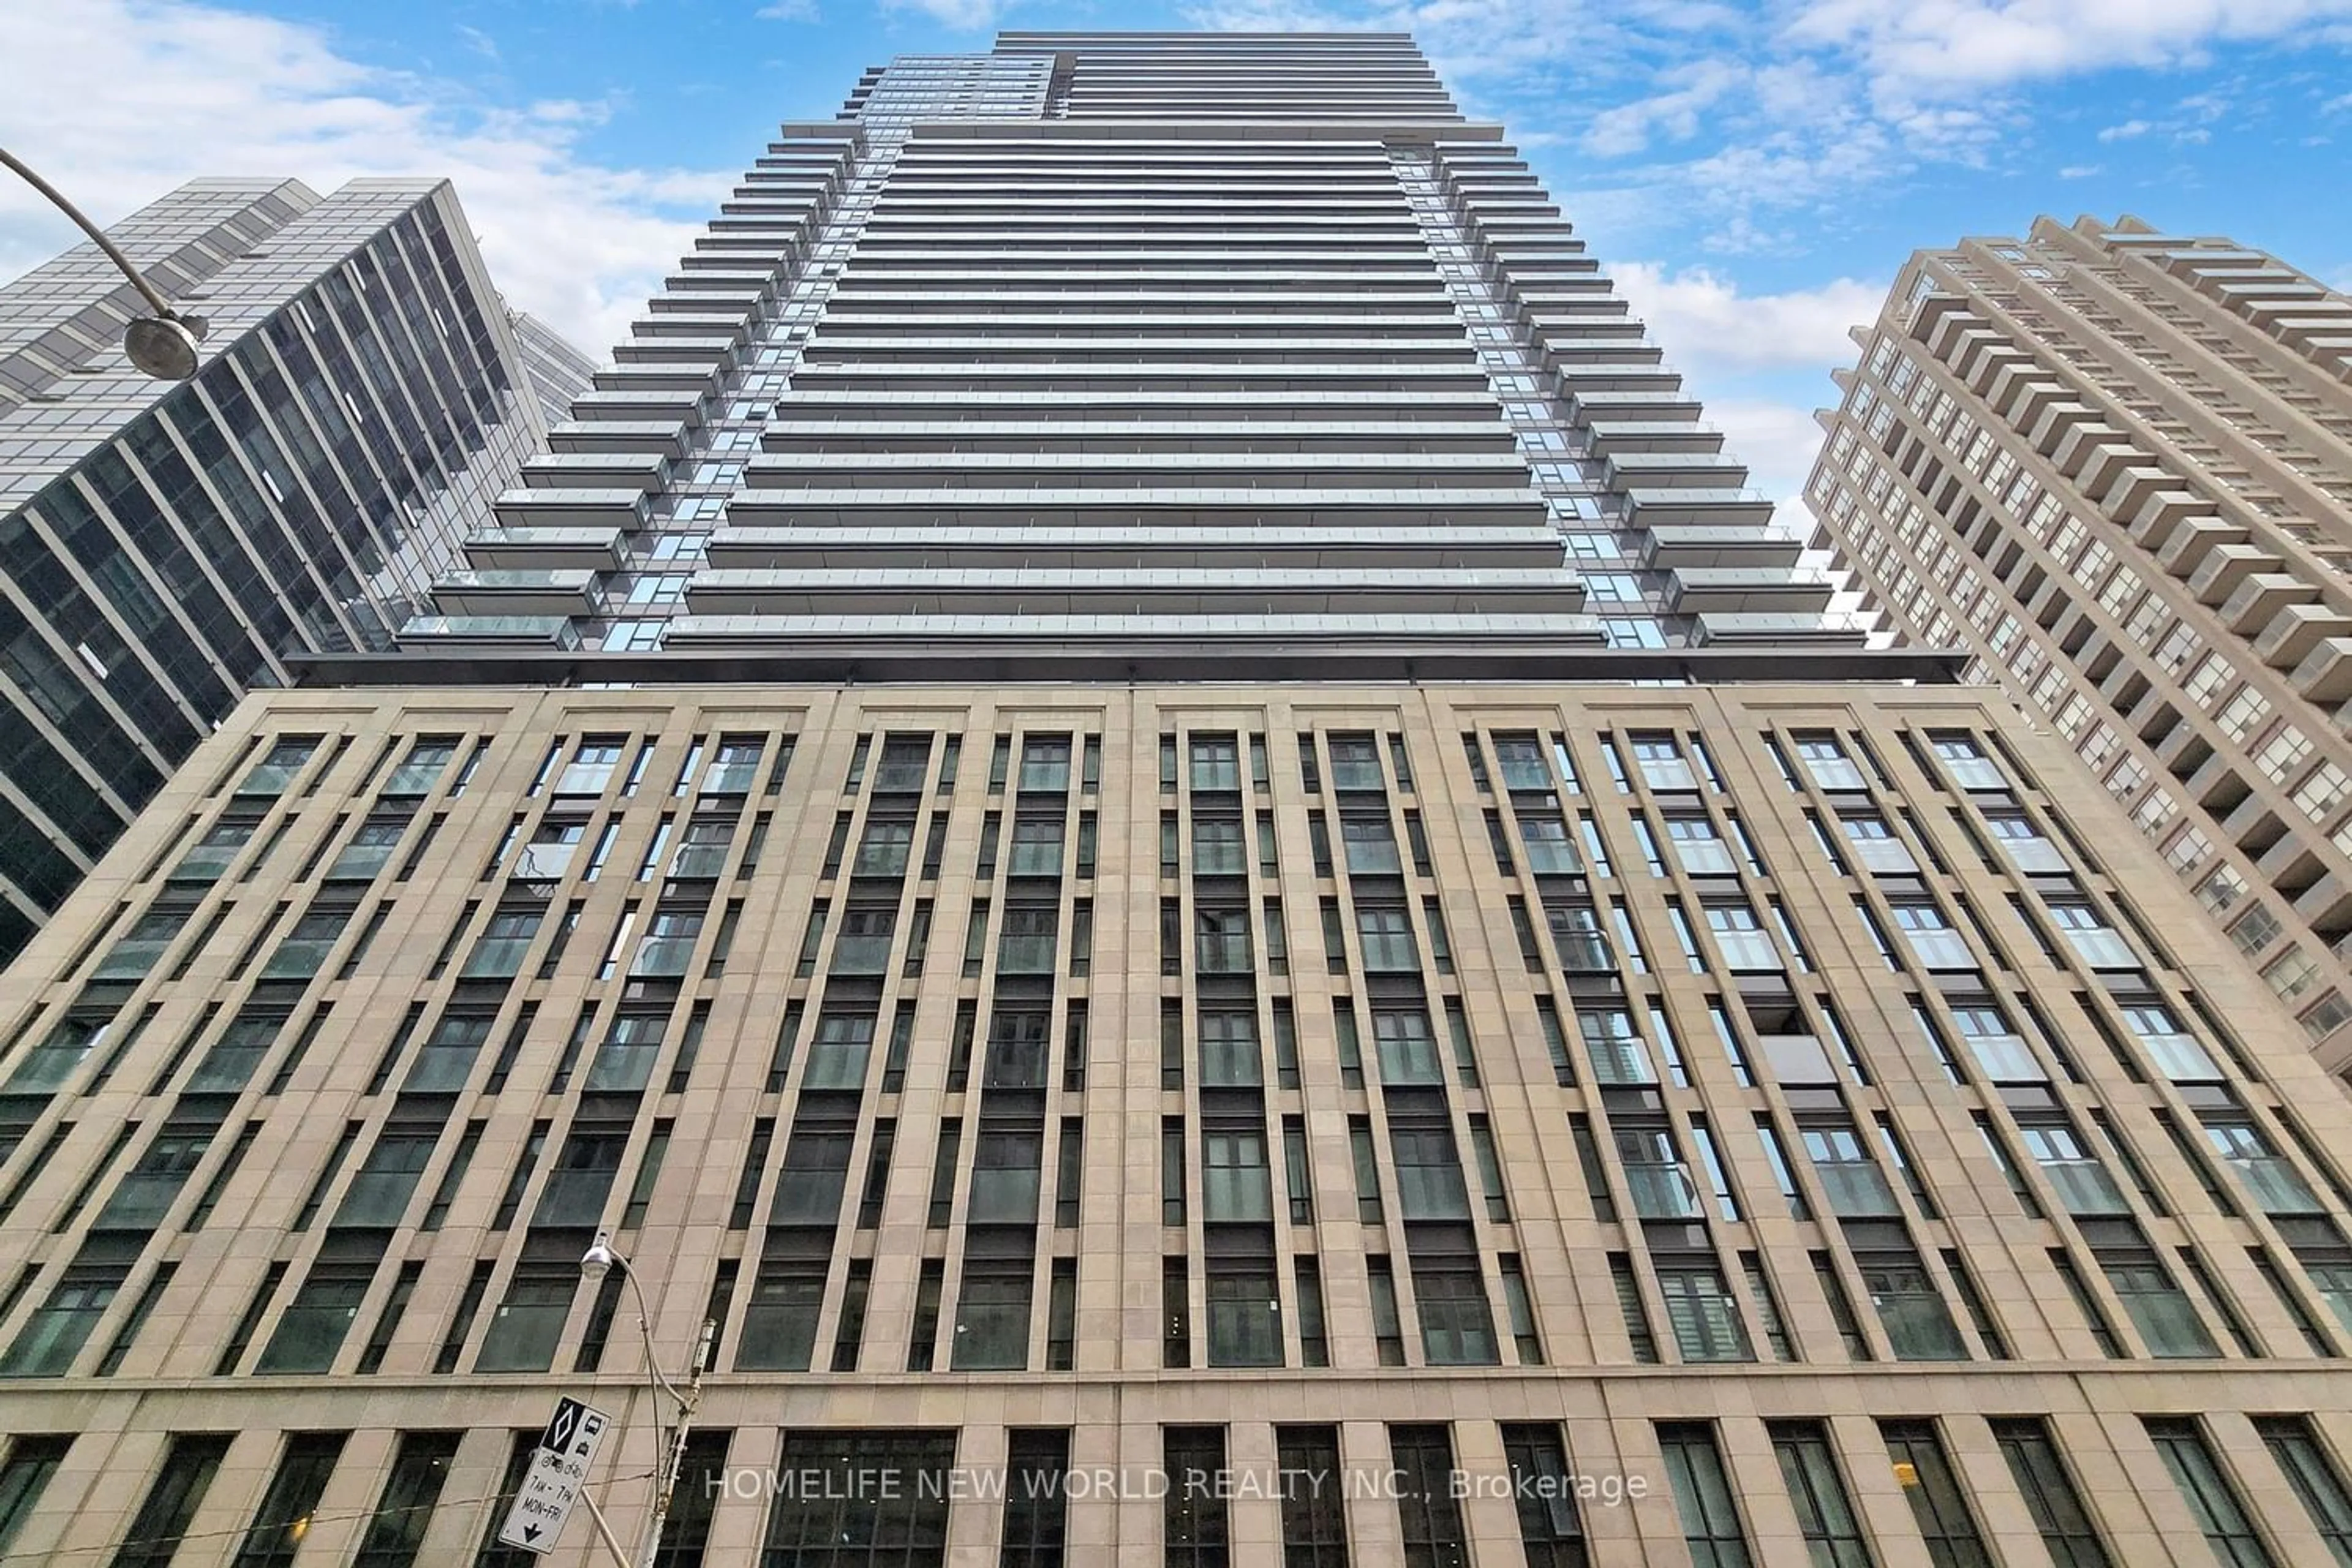 A pic from exterior of the house or condo for 955 BAY St #725, Toronto Ontario M5S 0C6